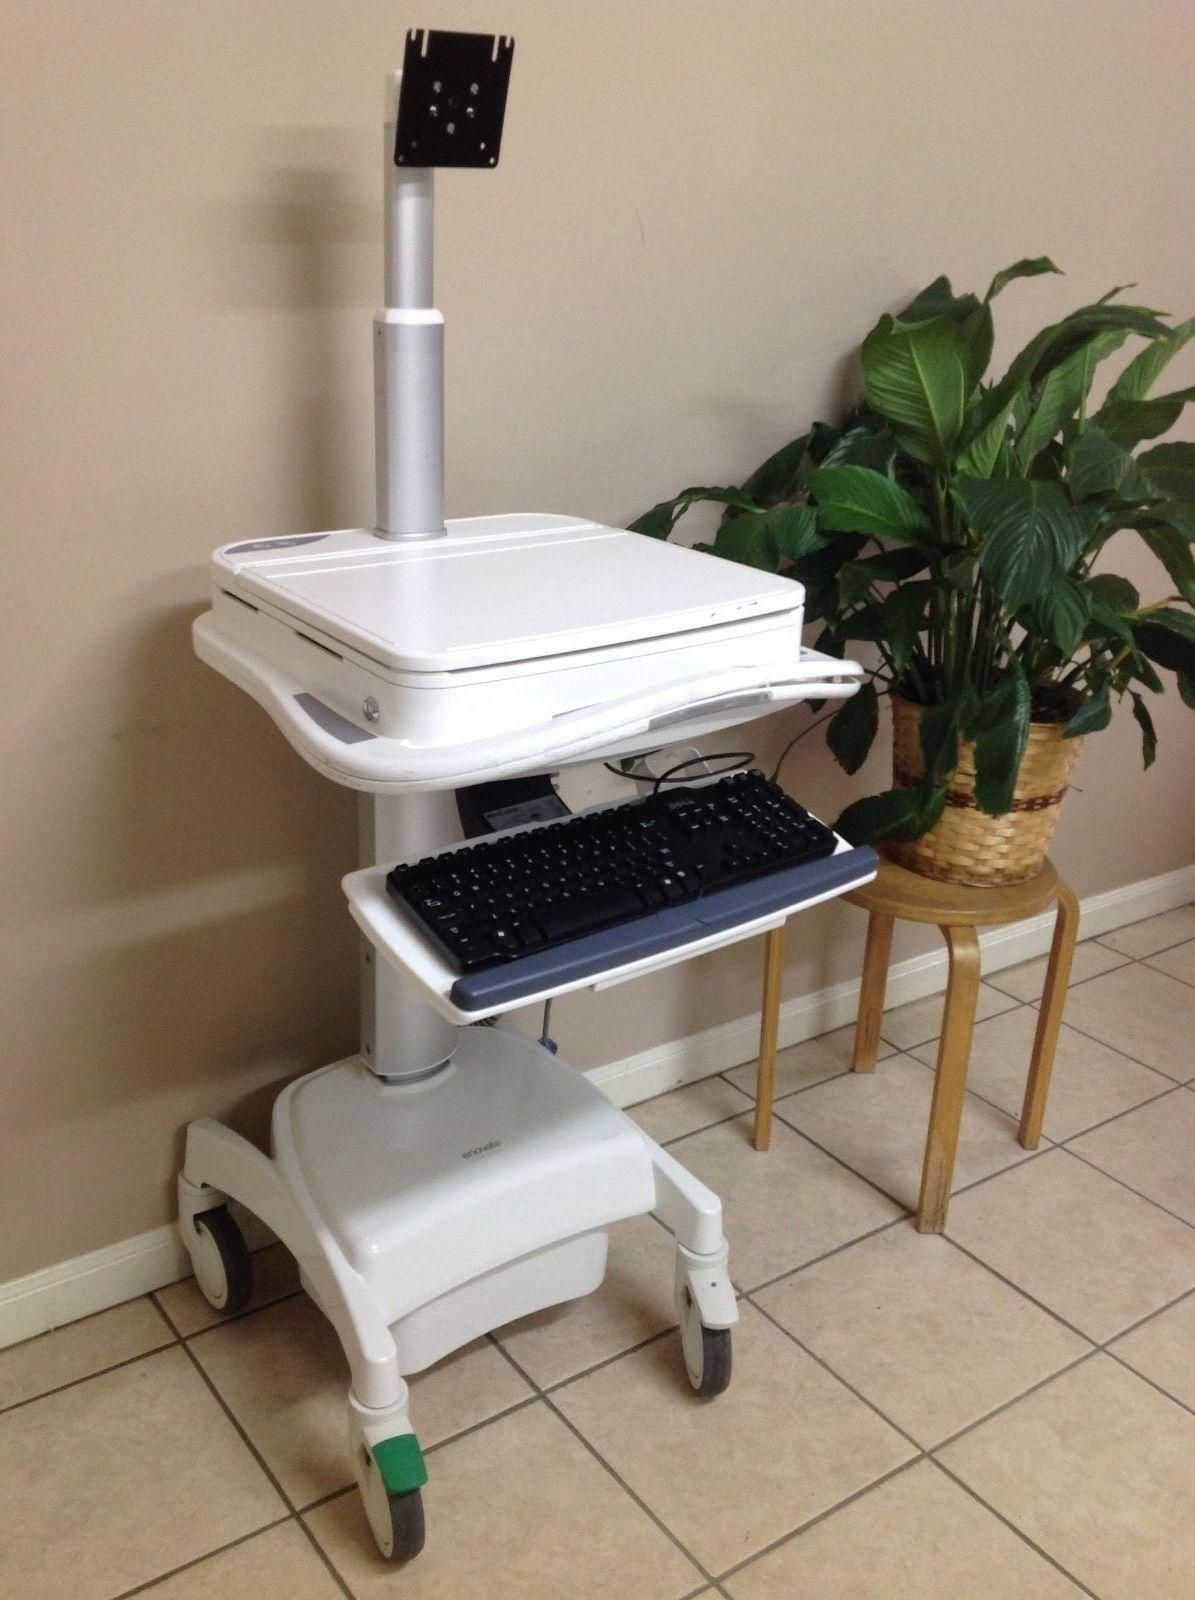 Enovate LCD patient data entry computer cart workstation S-M00-BBP-0-000